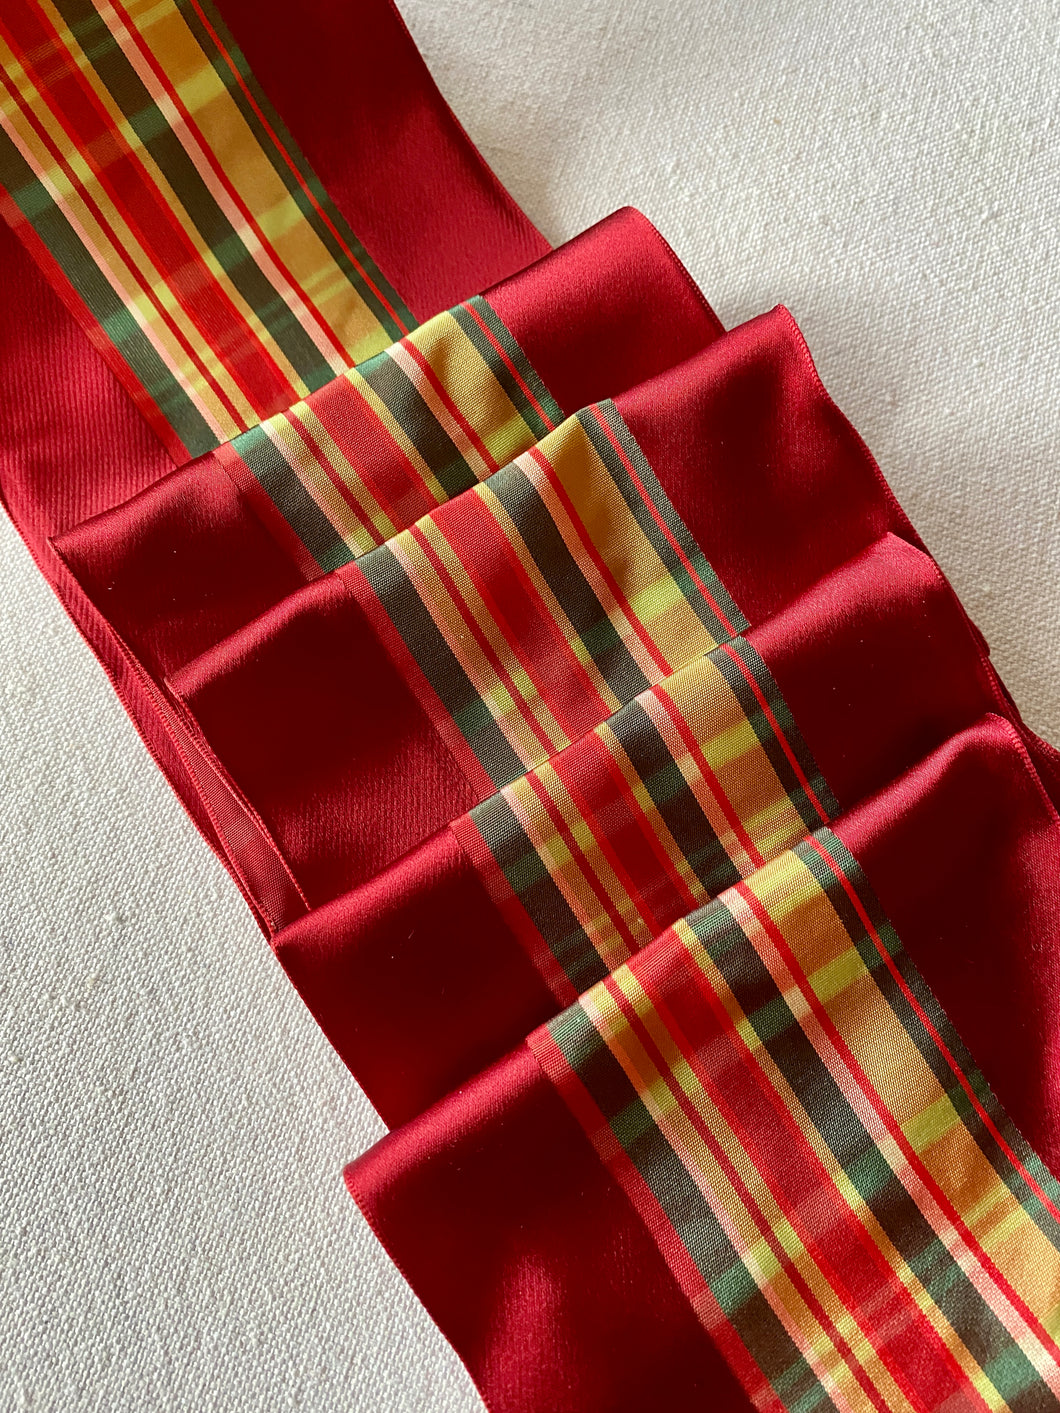 Satin Plaid French Wired Ribbon